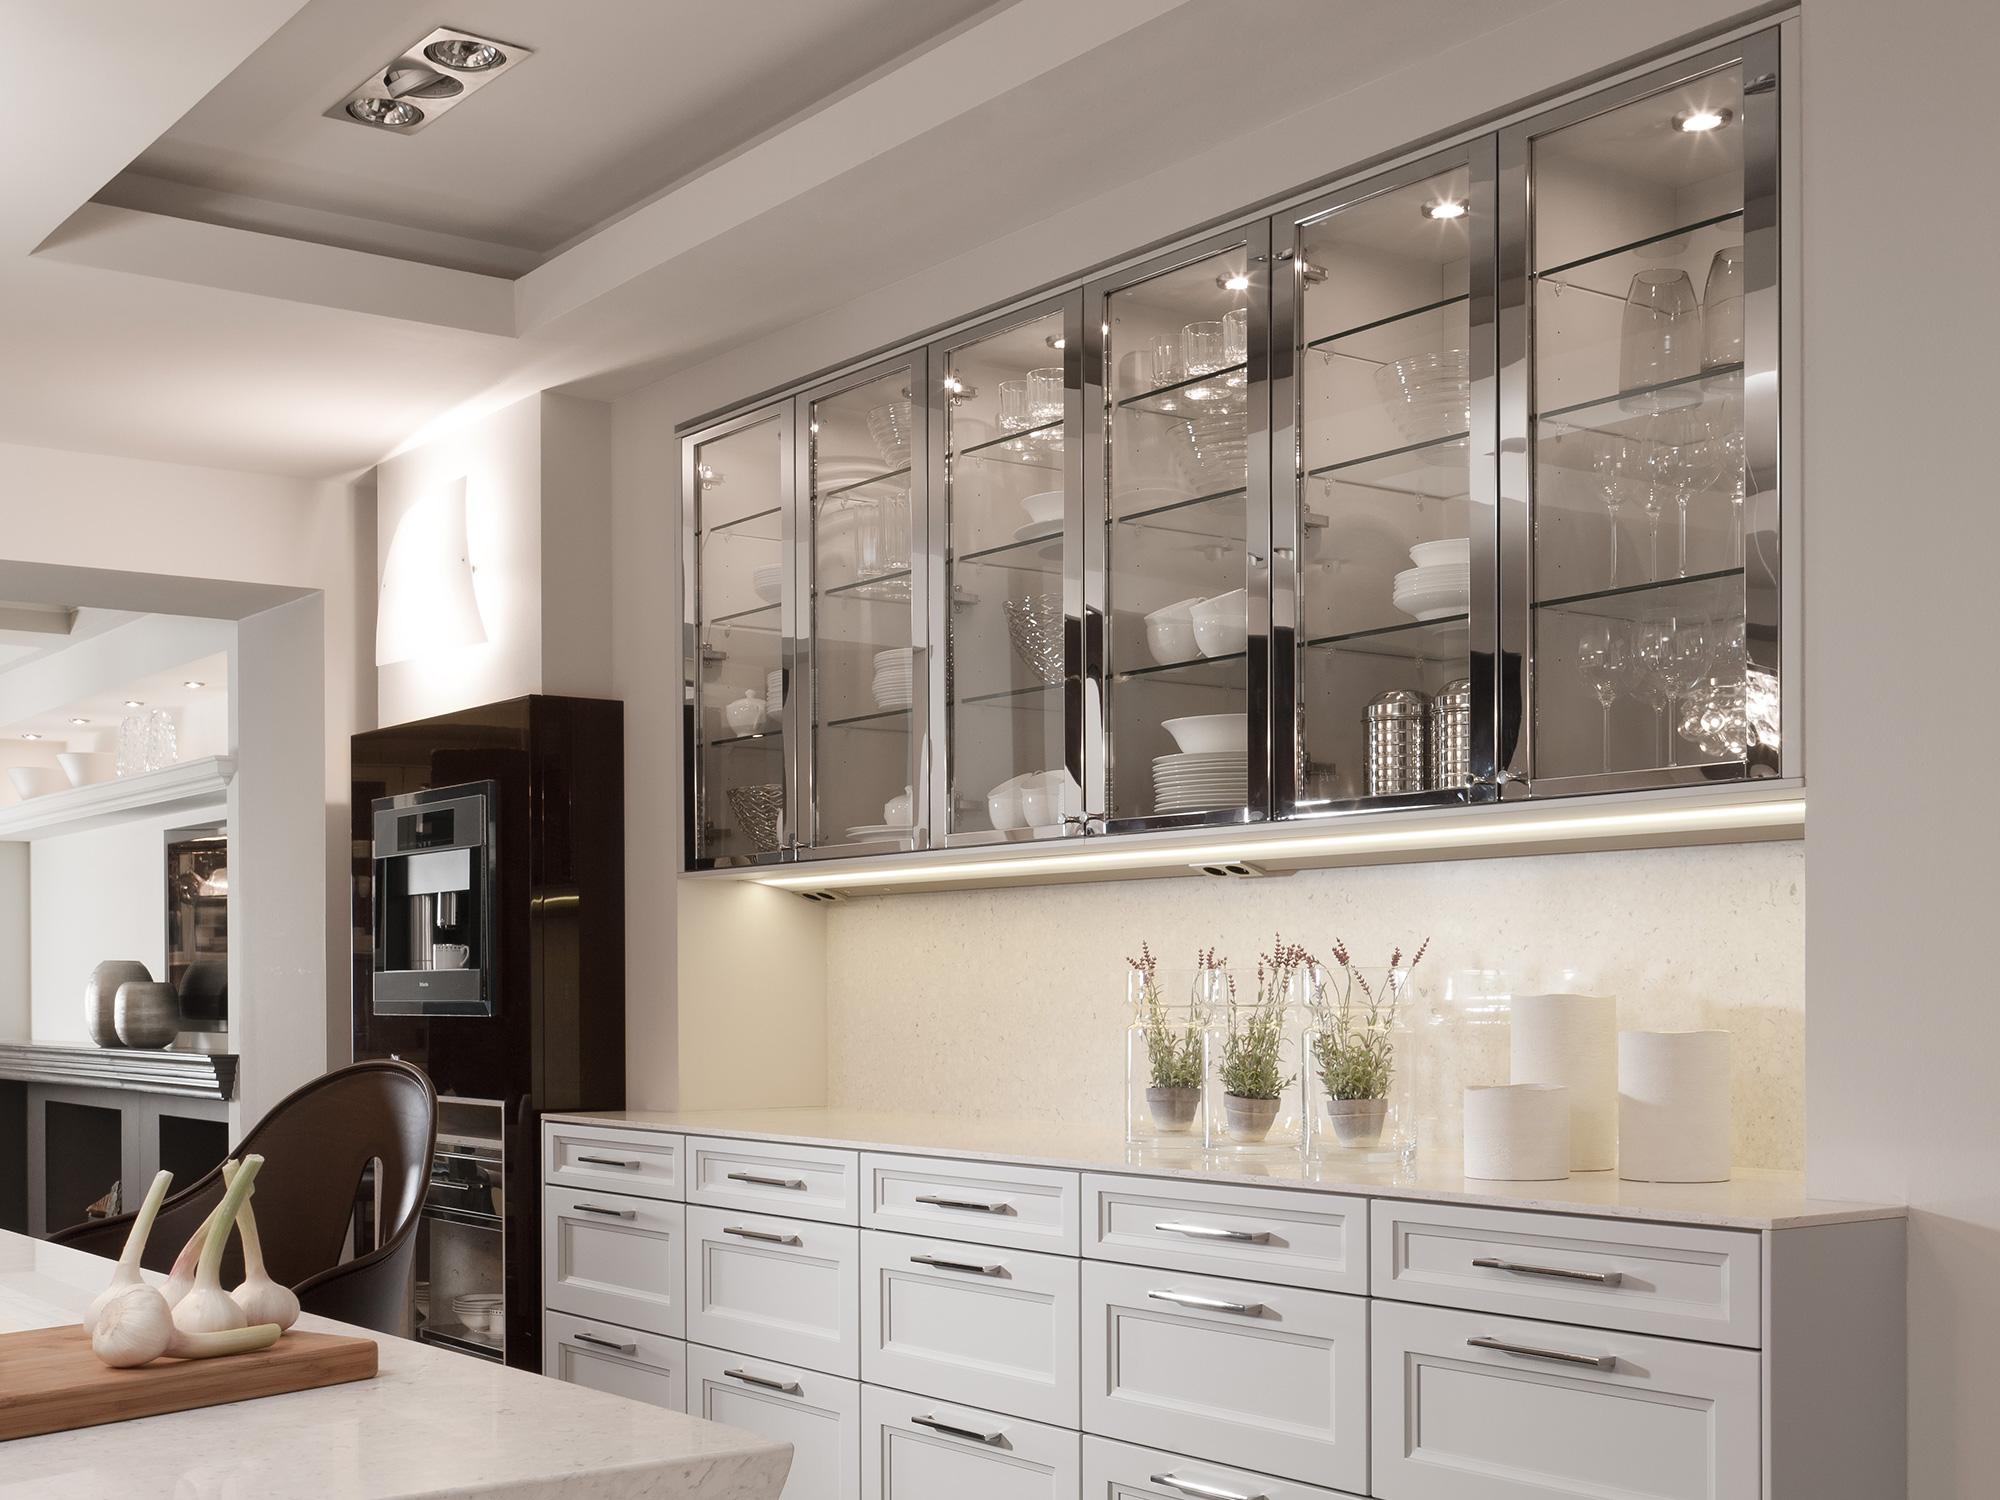 SieMatic BeauxArts.02 #küche ©SieMatic